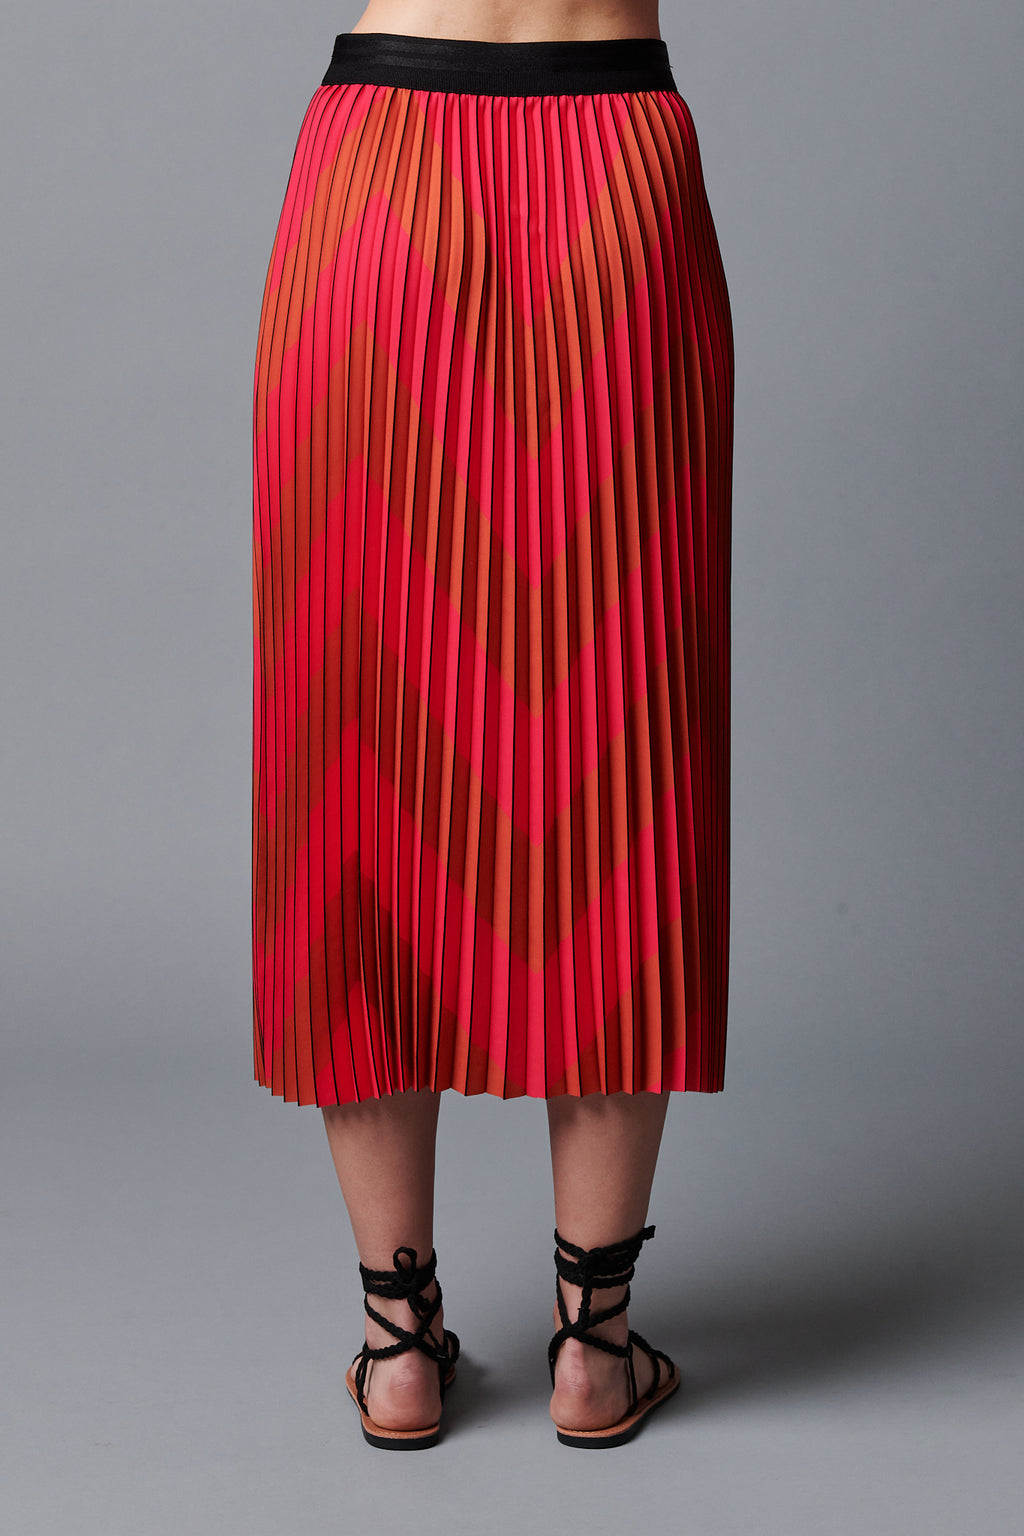 Le Superb Chevron Pleated Skirt in Pink/Red